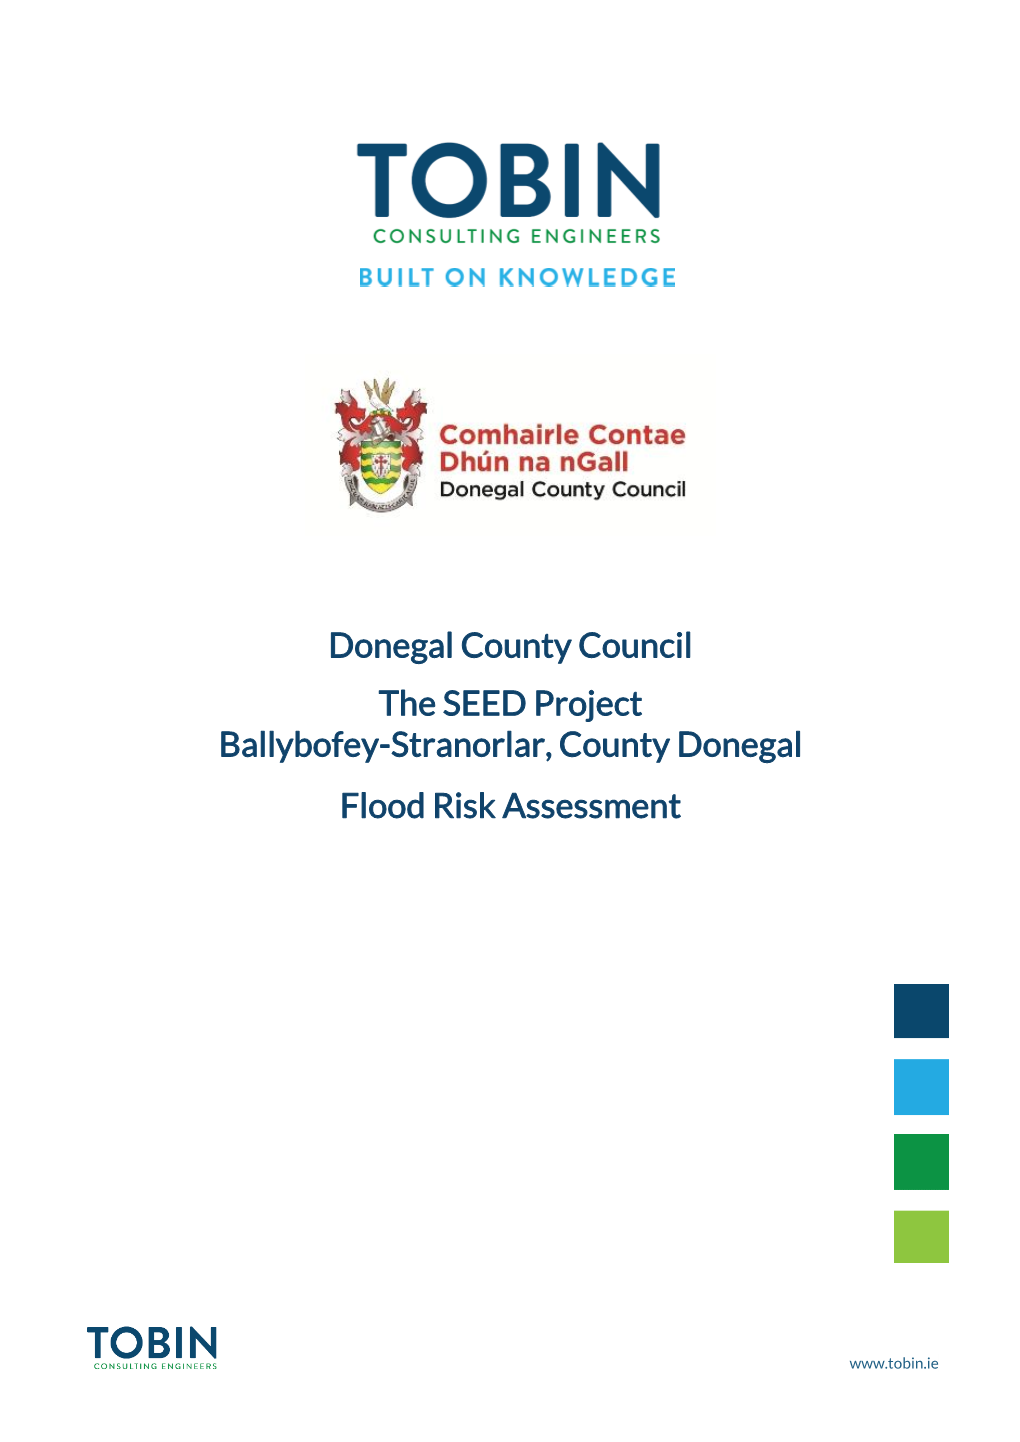 Donegal County Council the SEED Project Ballybofey-Stranorlar, County Donegal Flood Risk Assessment